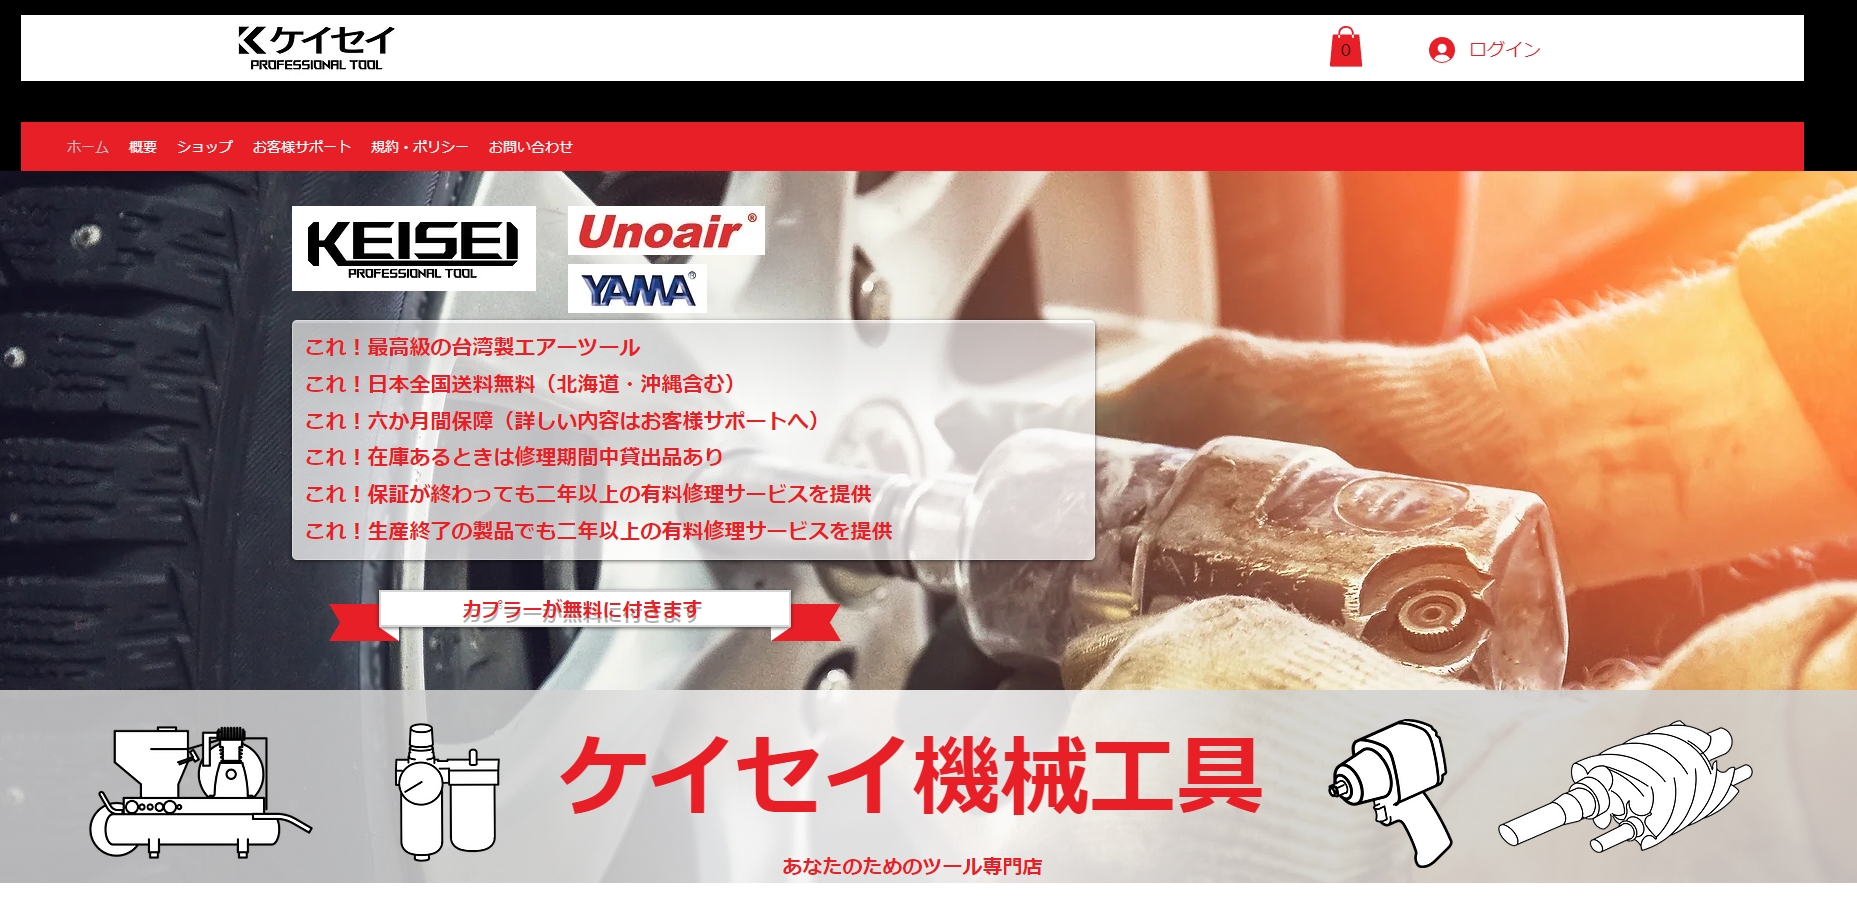 UNOAIR Weekly Update 11/08/2023 UNOAIR products now available in Japan at KEISEI MACHINE TOOLS